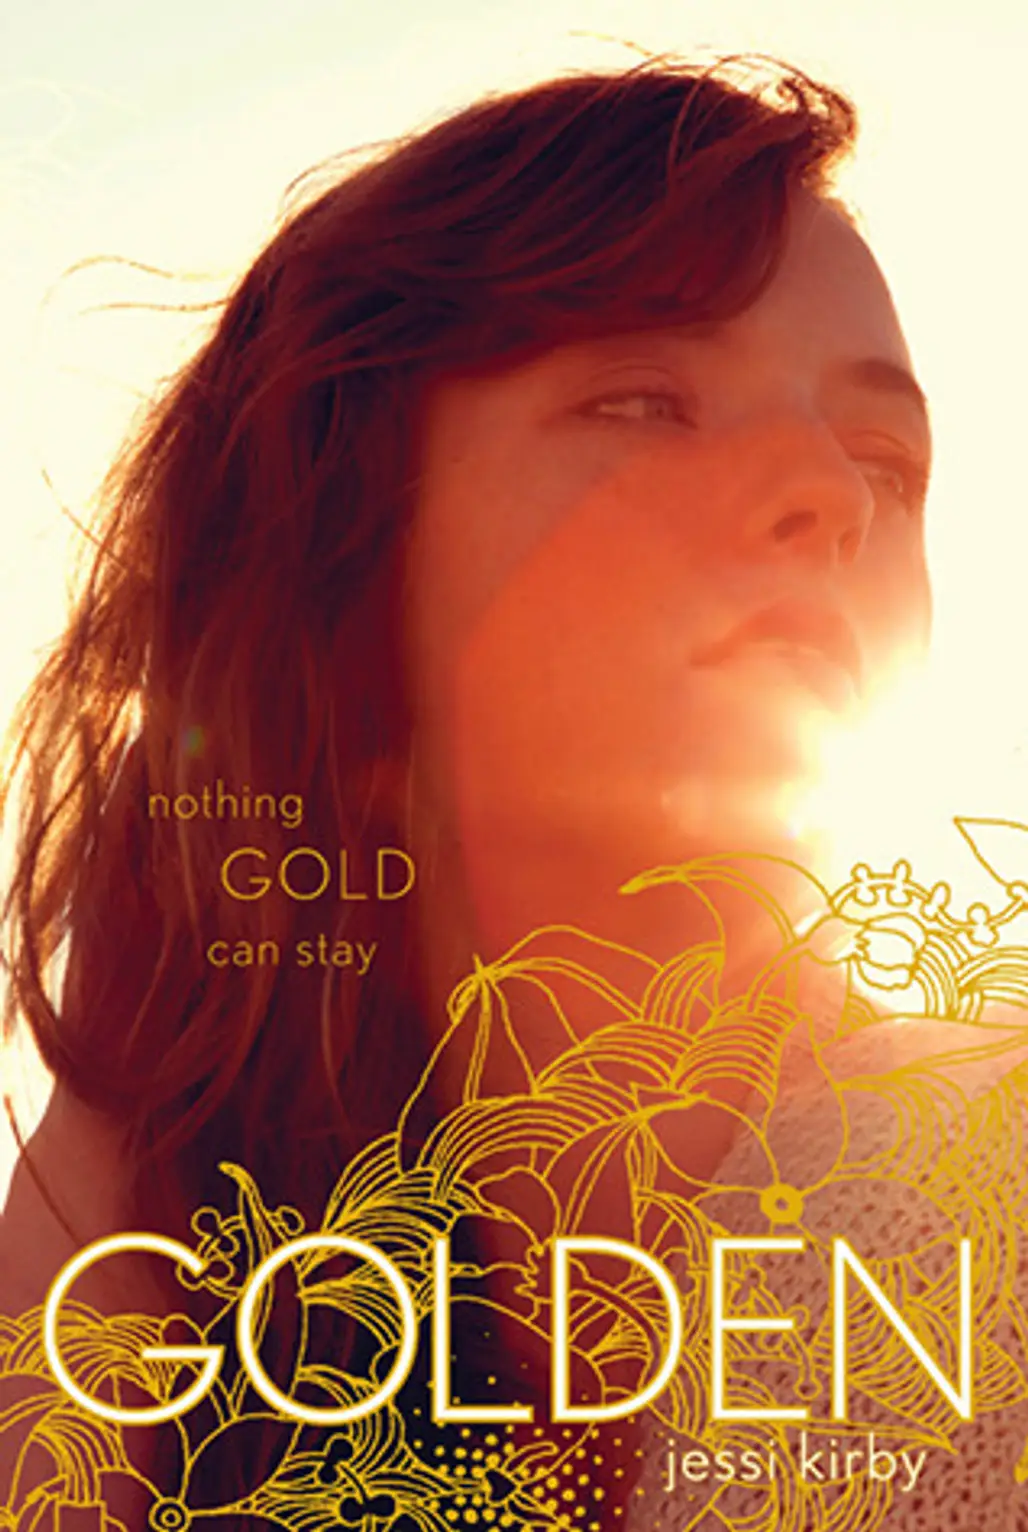 Golden by Jessica Irby